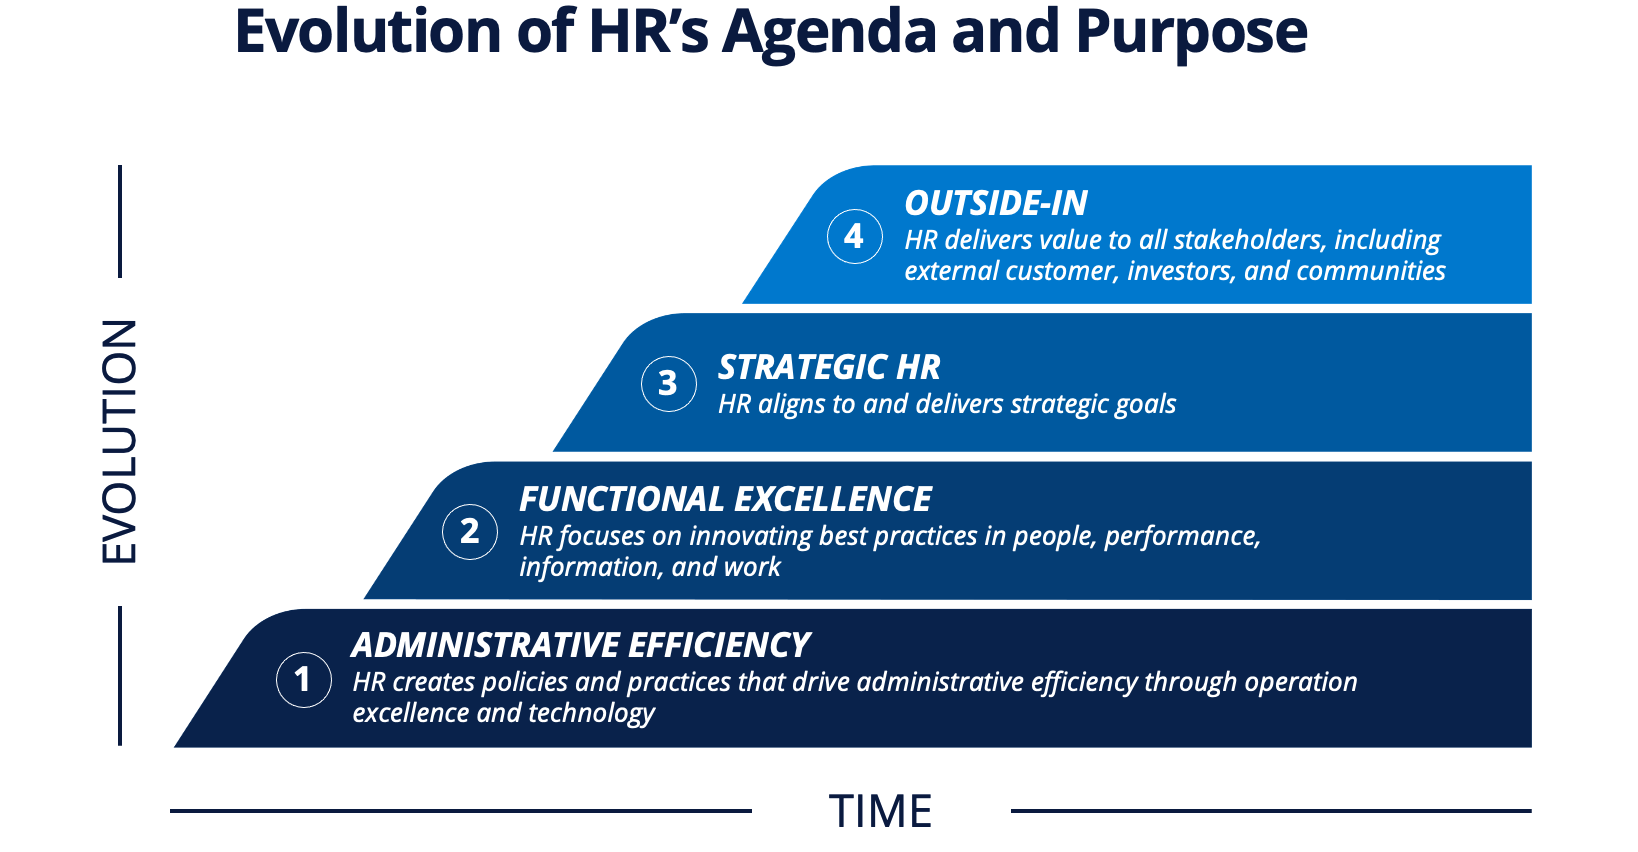 HR Champions - The Theory of Business Evolution